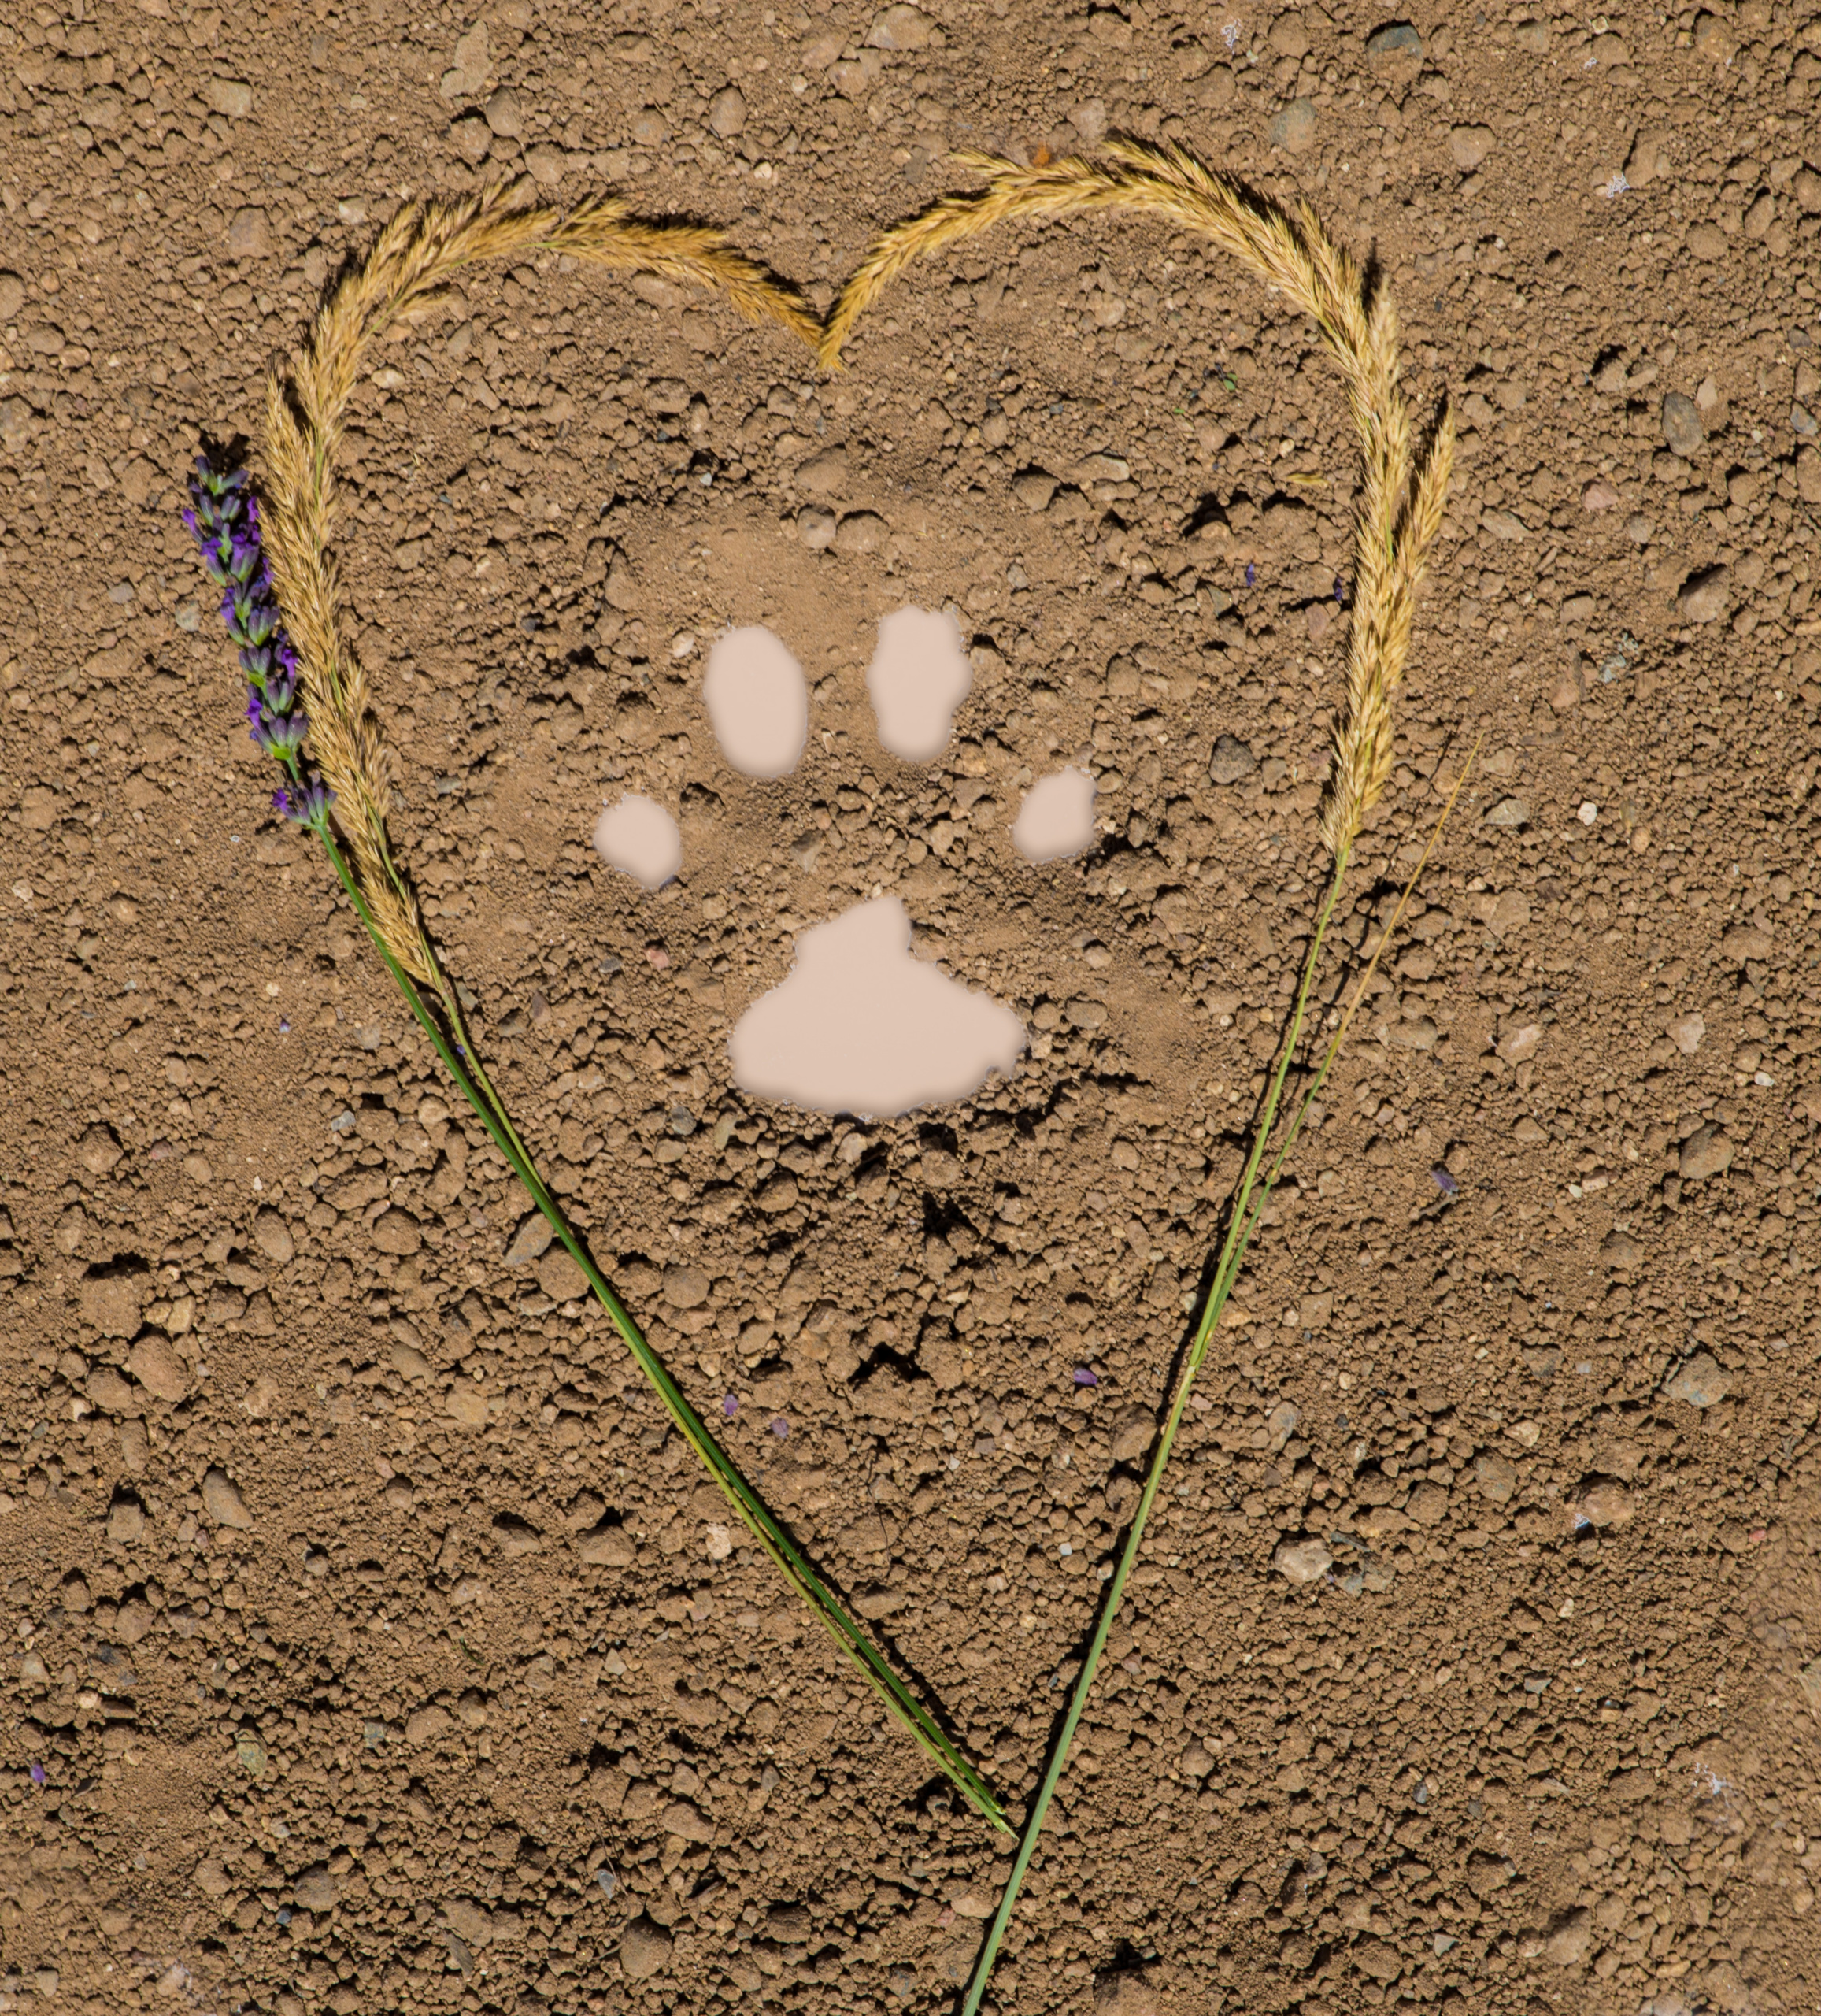 Heart_Paw_Coping_With_Pet_Loss_Animal_Humane_New_Mexico_072921